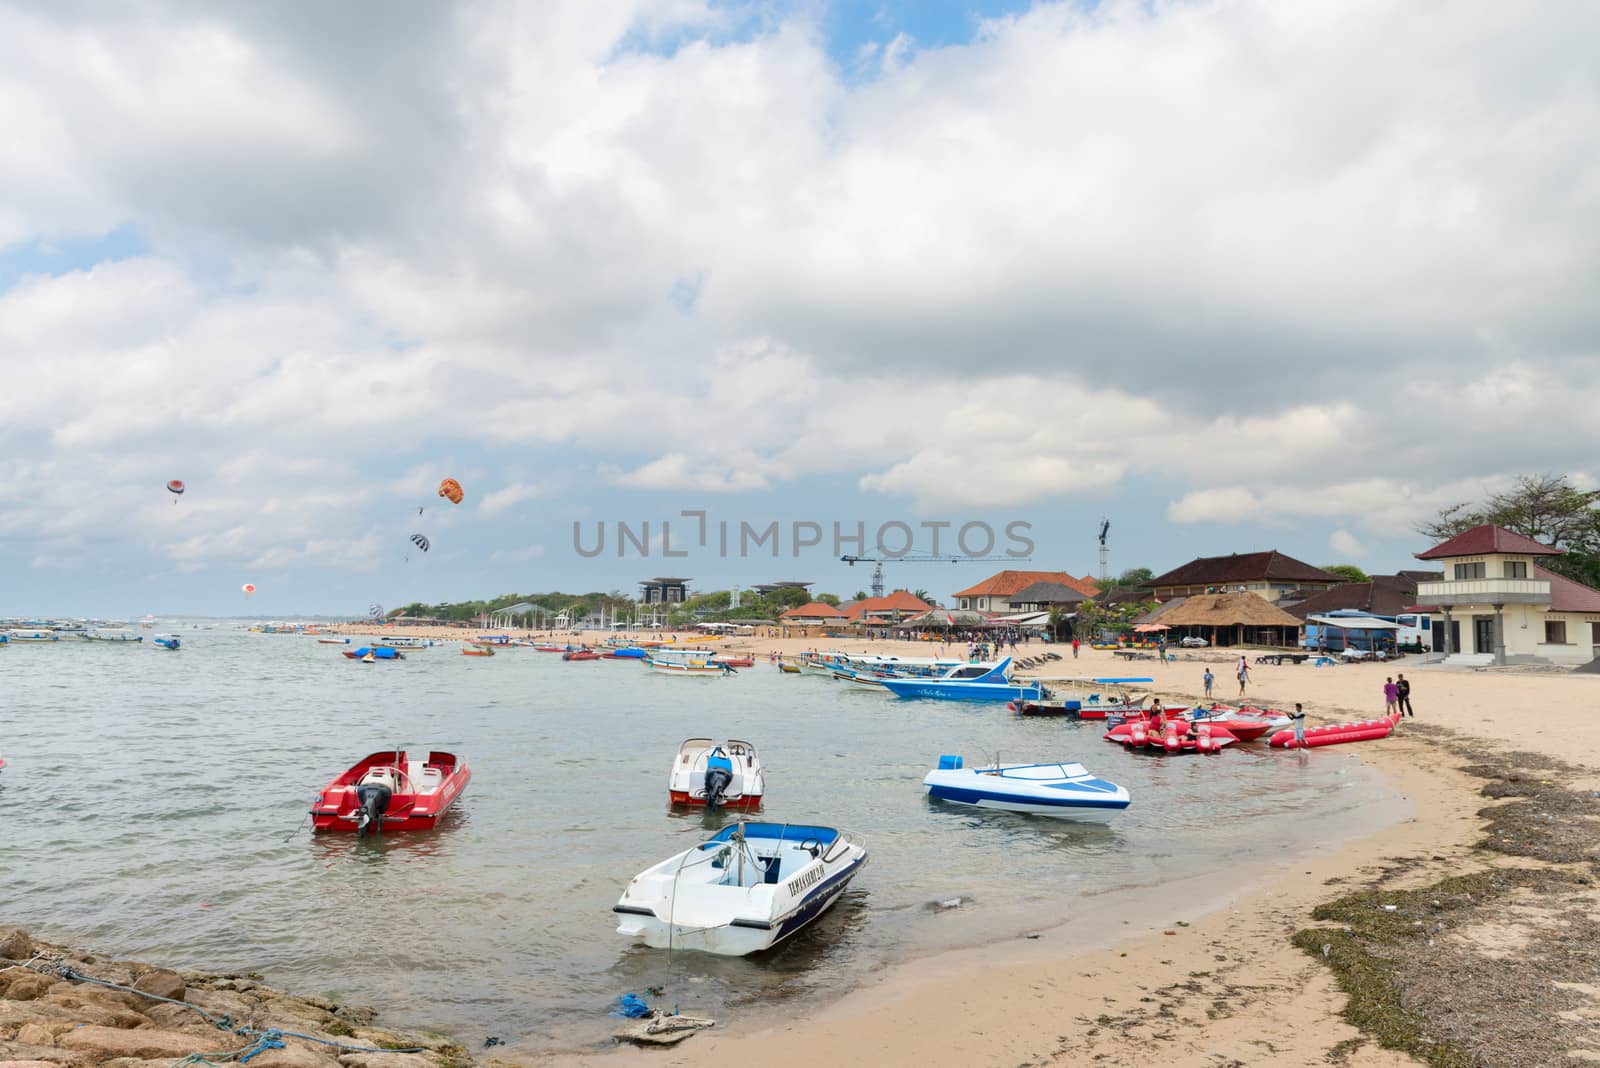 NUSA DUA, BALI - SEP 13: Motor boats on sand beach in Tanjung Benoa area on Sep 13, 2012 in Nusa Dua, Bali. Tanjung Benoa is popular tourist place for  watersport and various games.